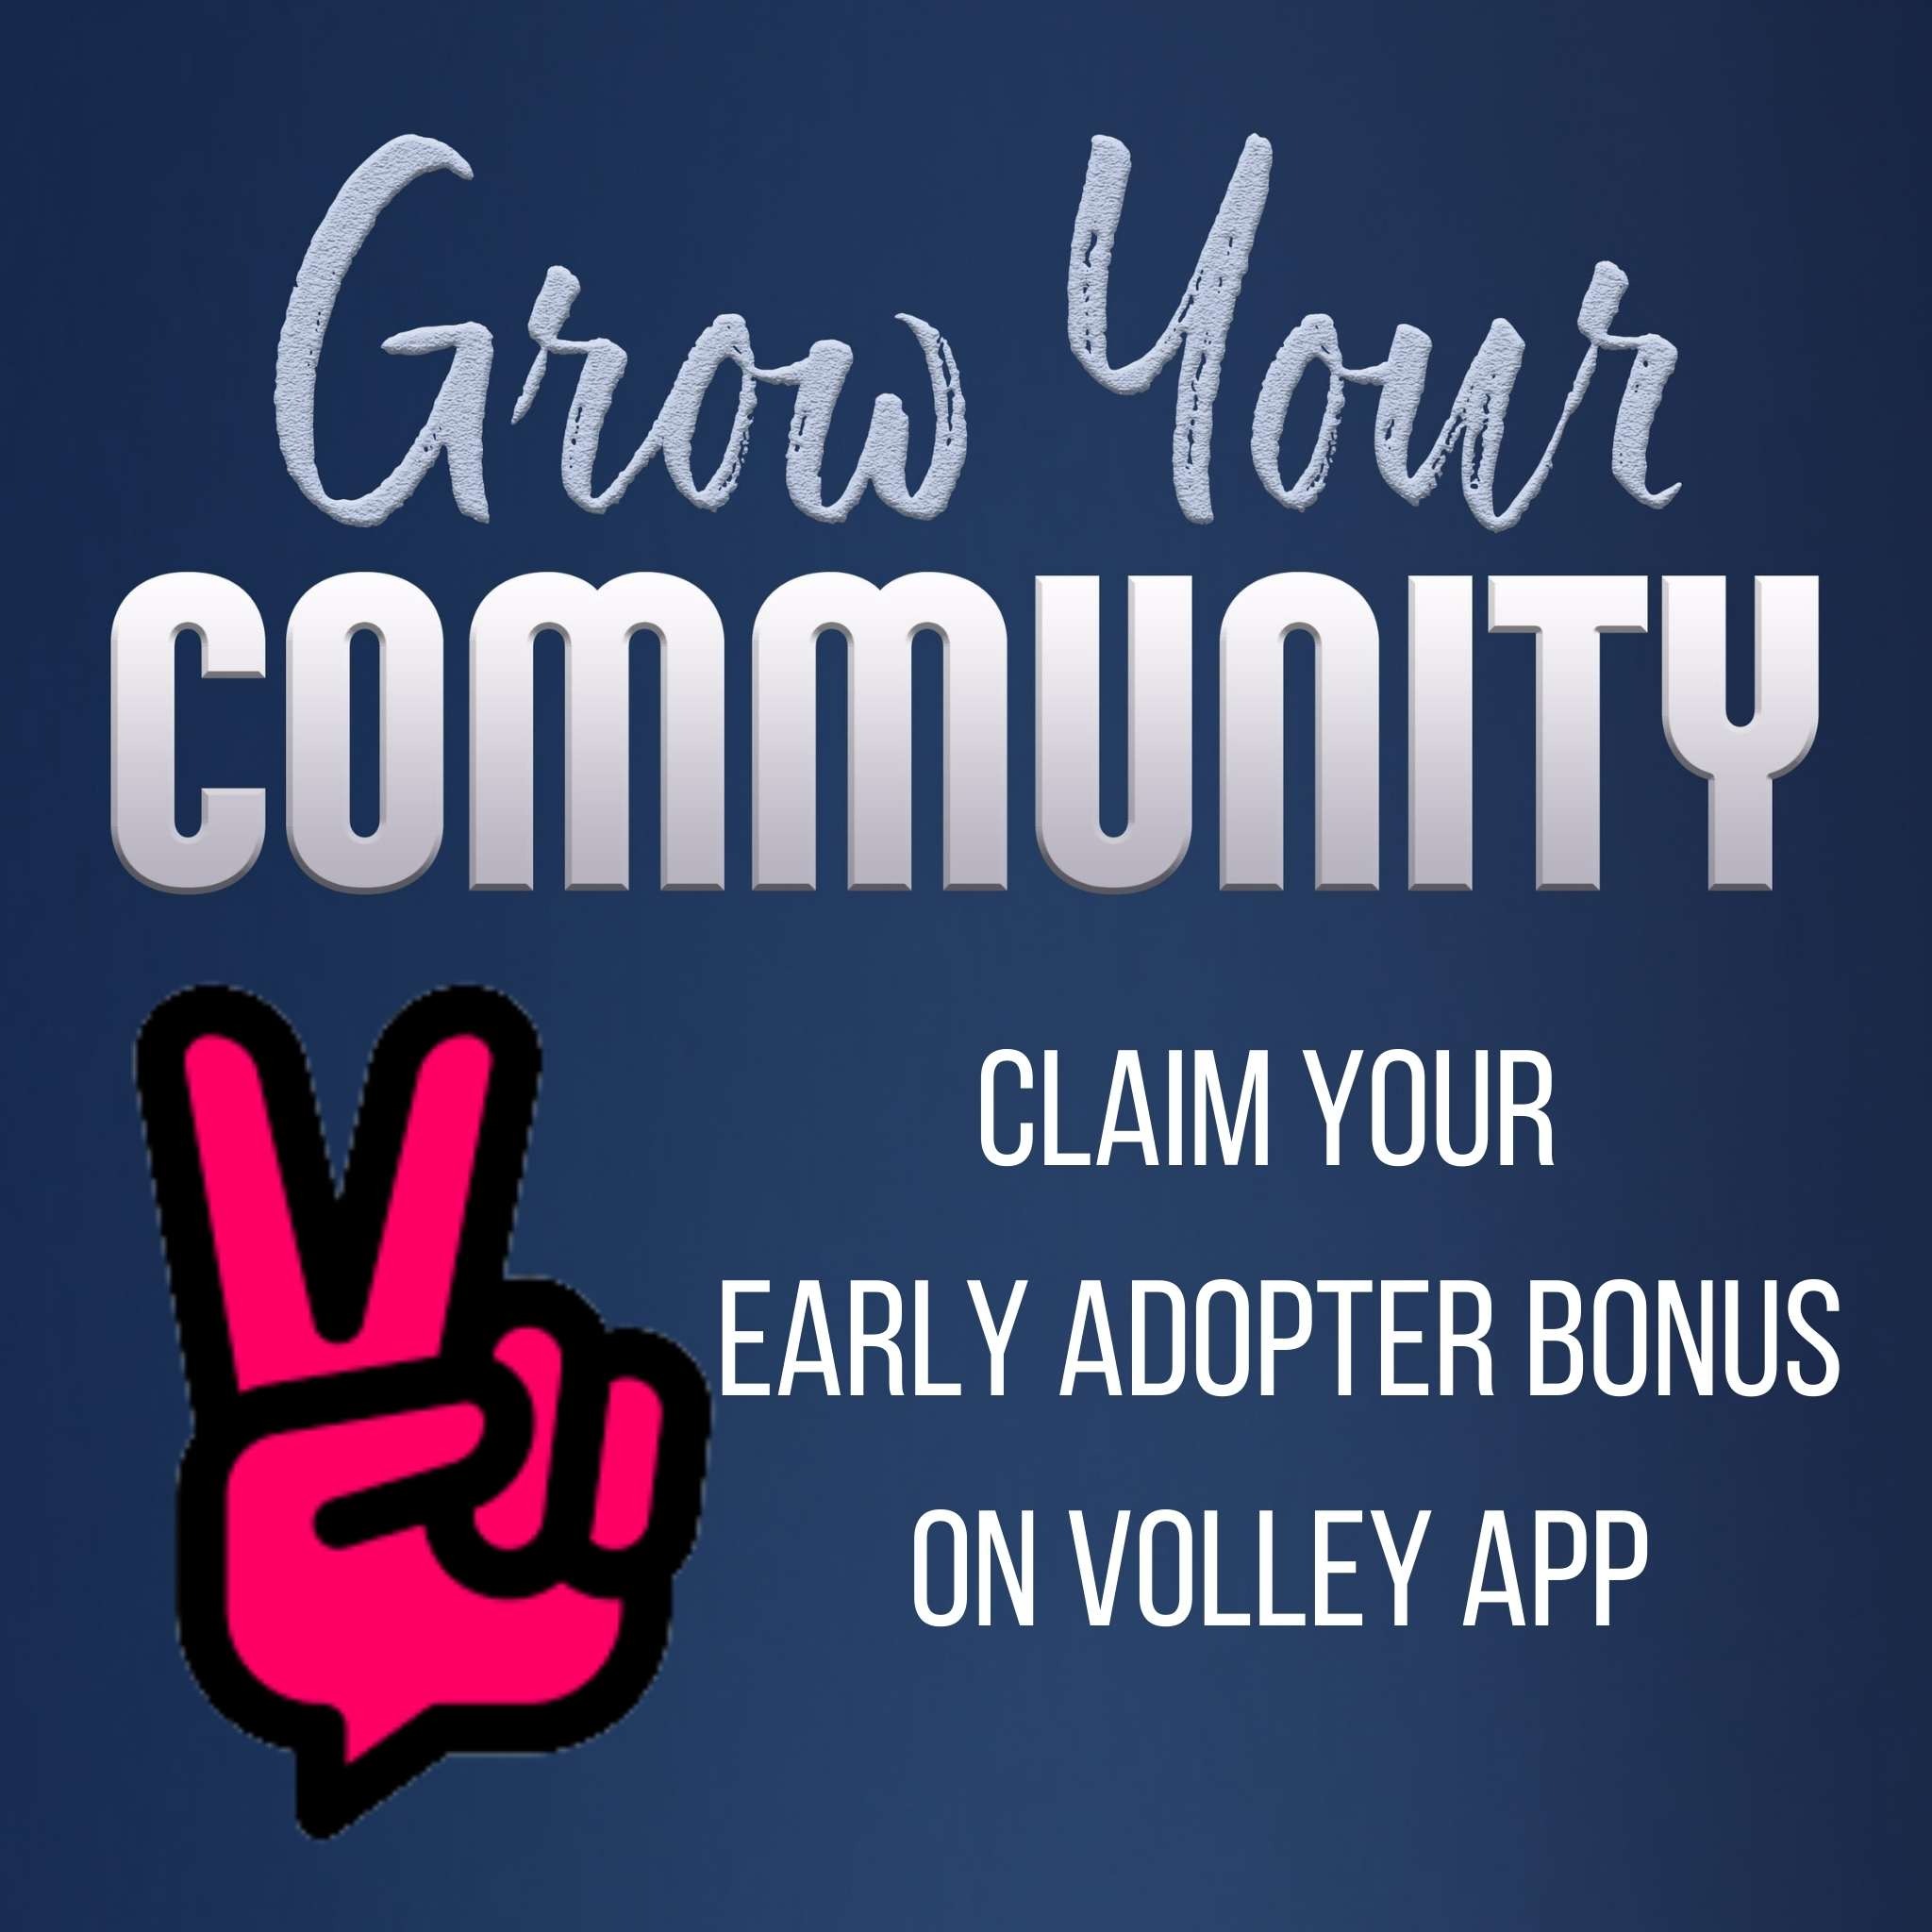 Claim Your Early Adopter Bonus on Volley App